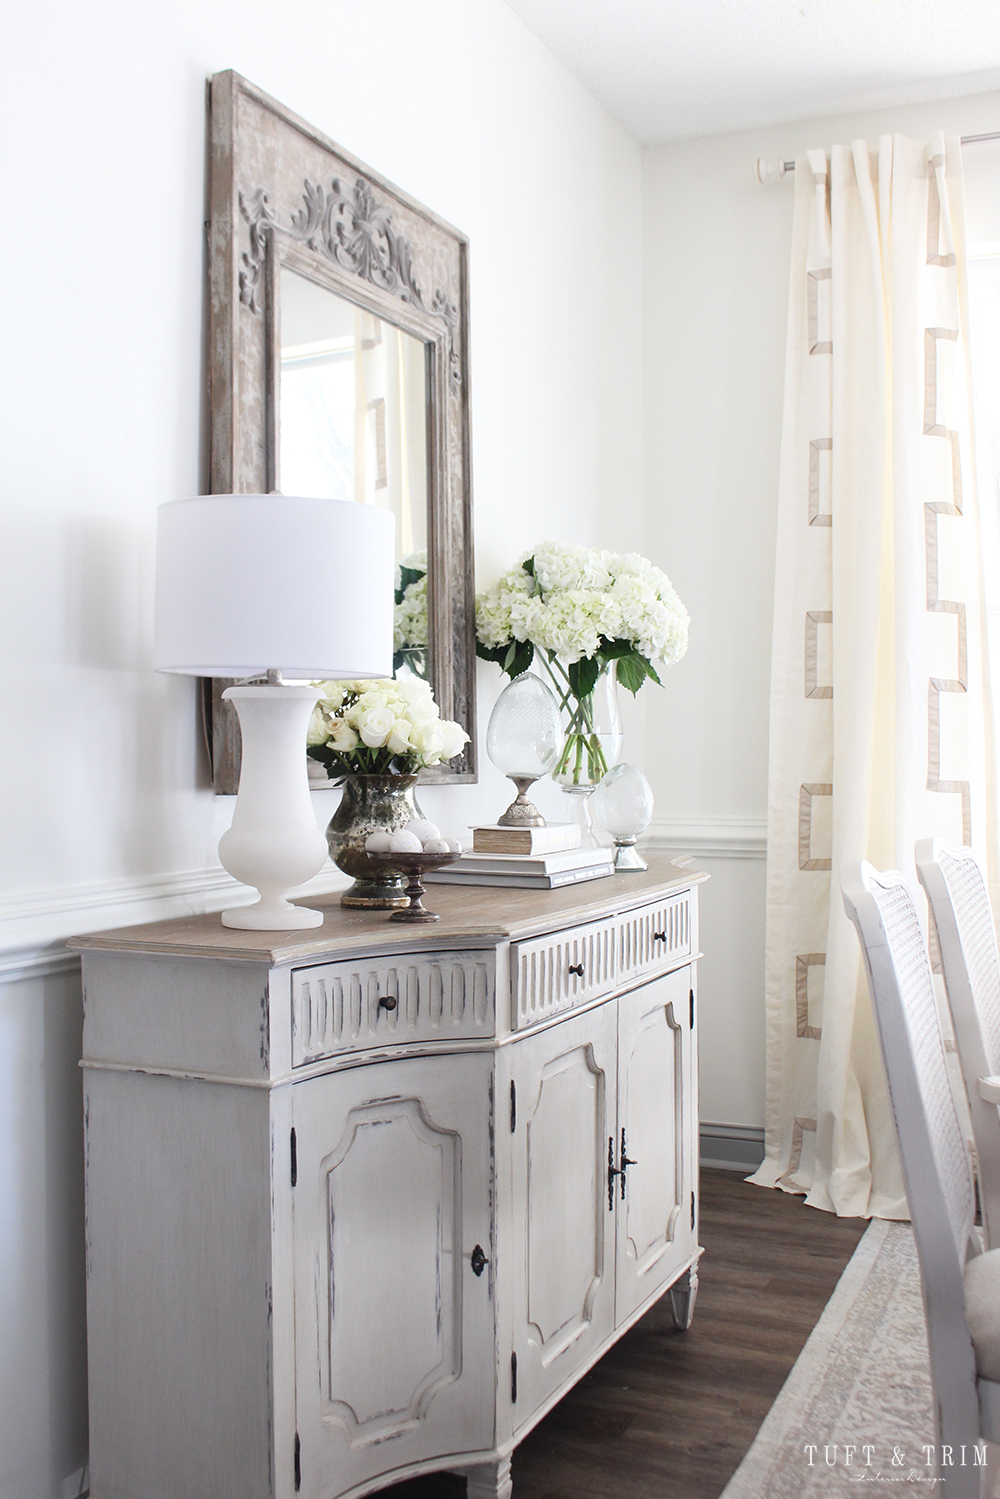 A French Country Spring Table by Tuft & Trim Interior Design. Shop the look at tuftandtrim.com